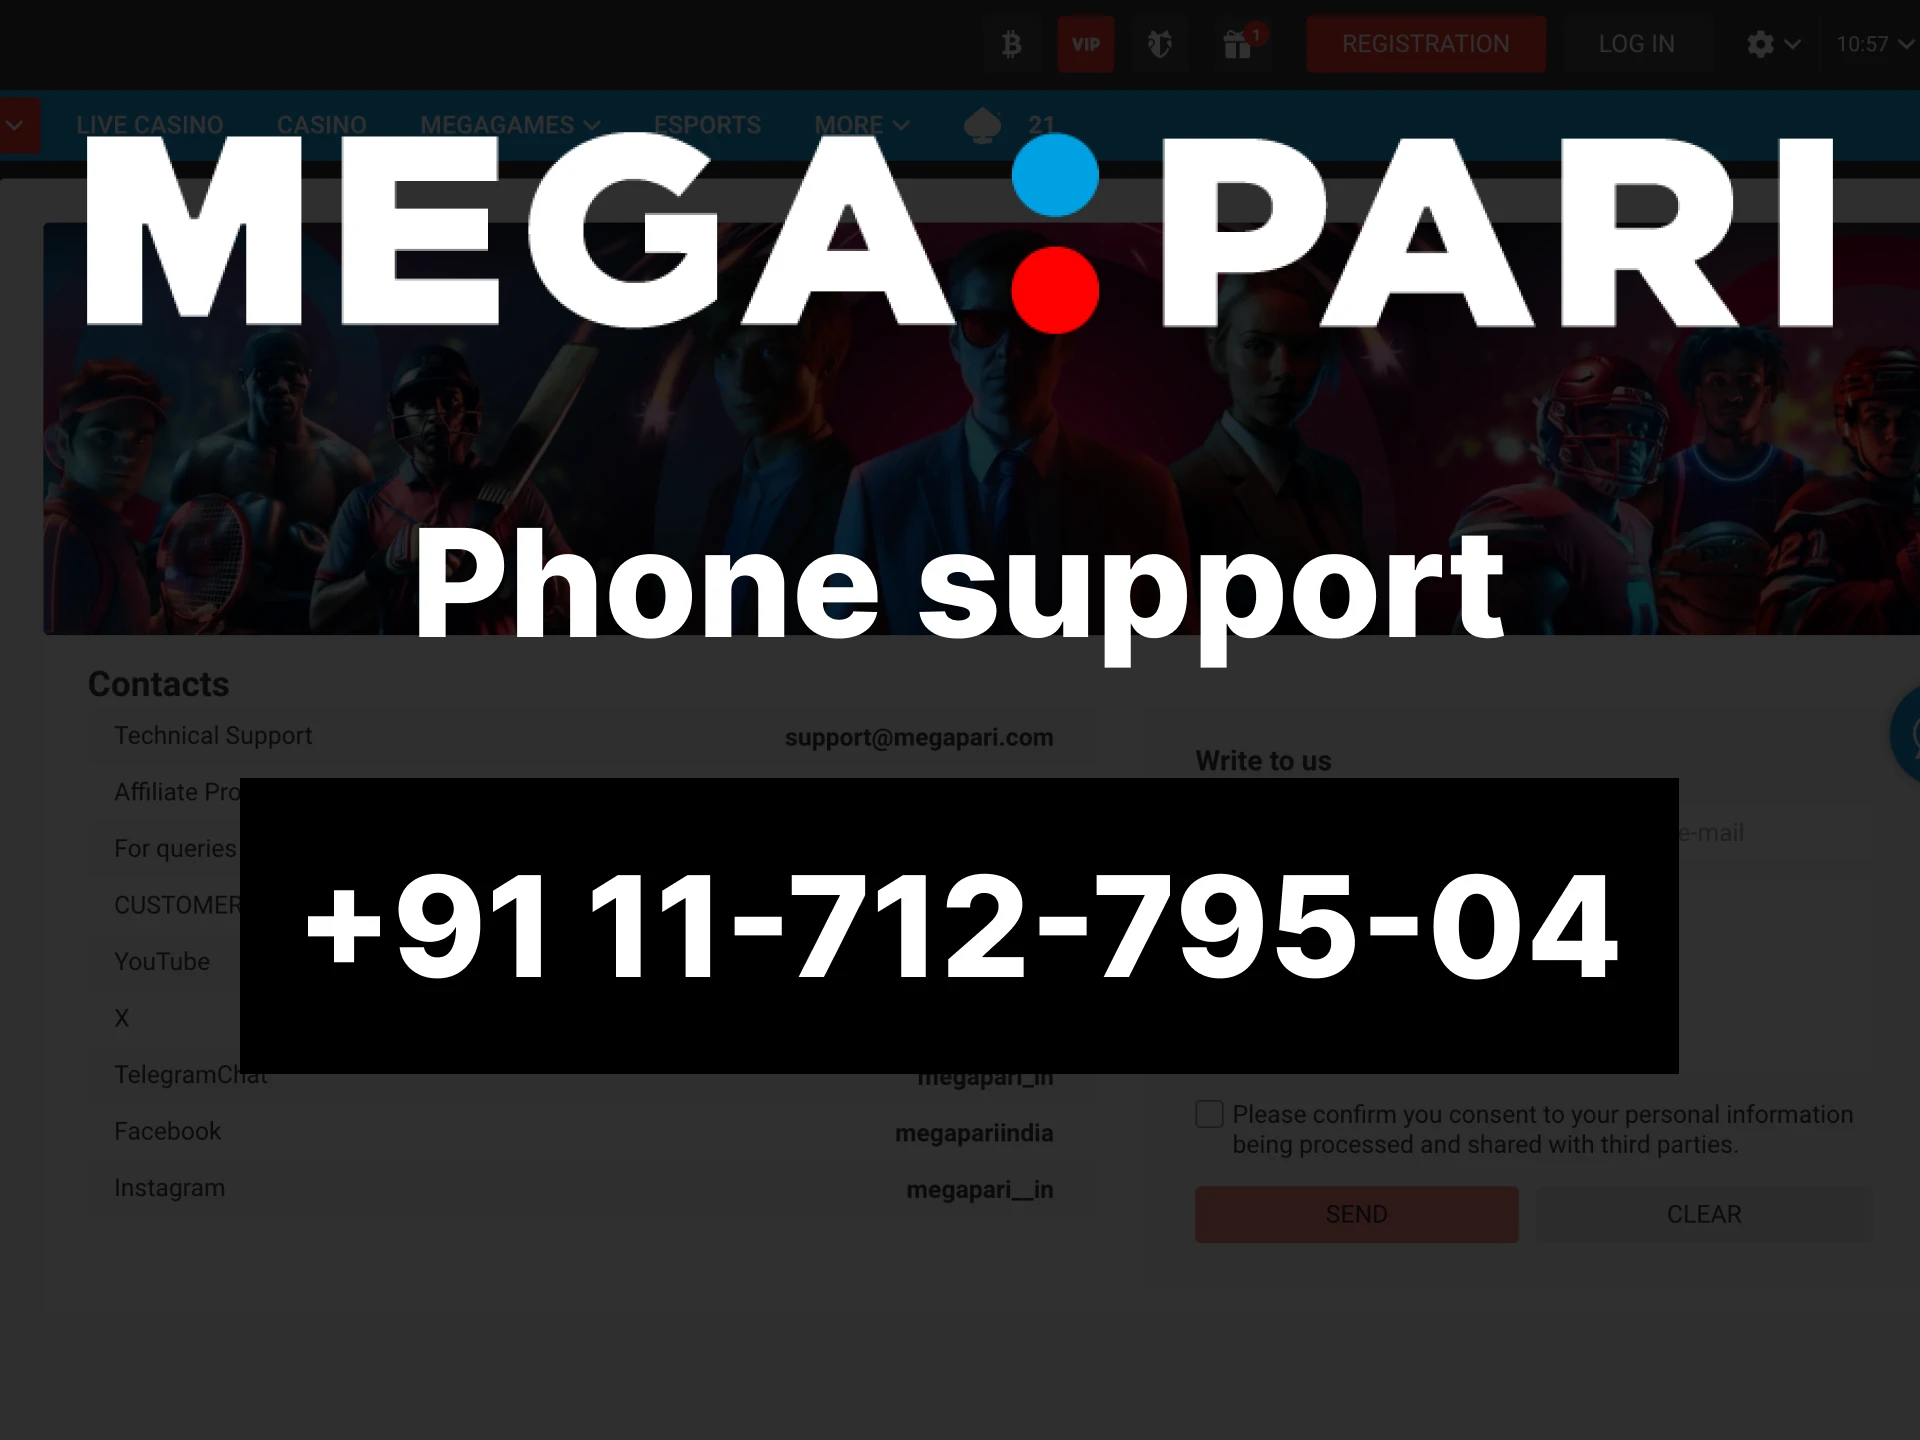 What is the phone number for technical support of the Megapari online casino site.